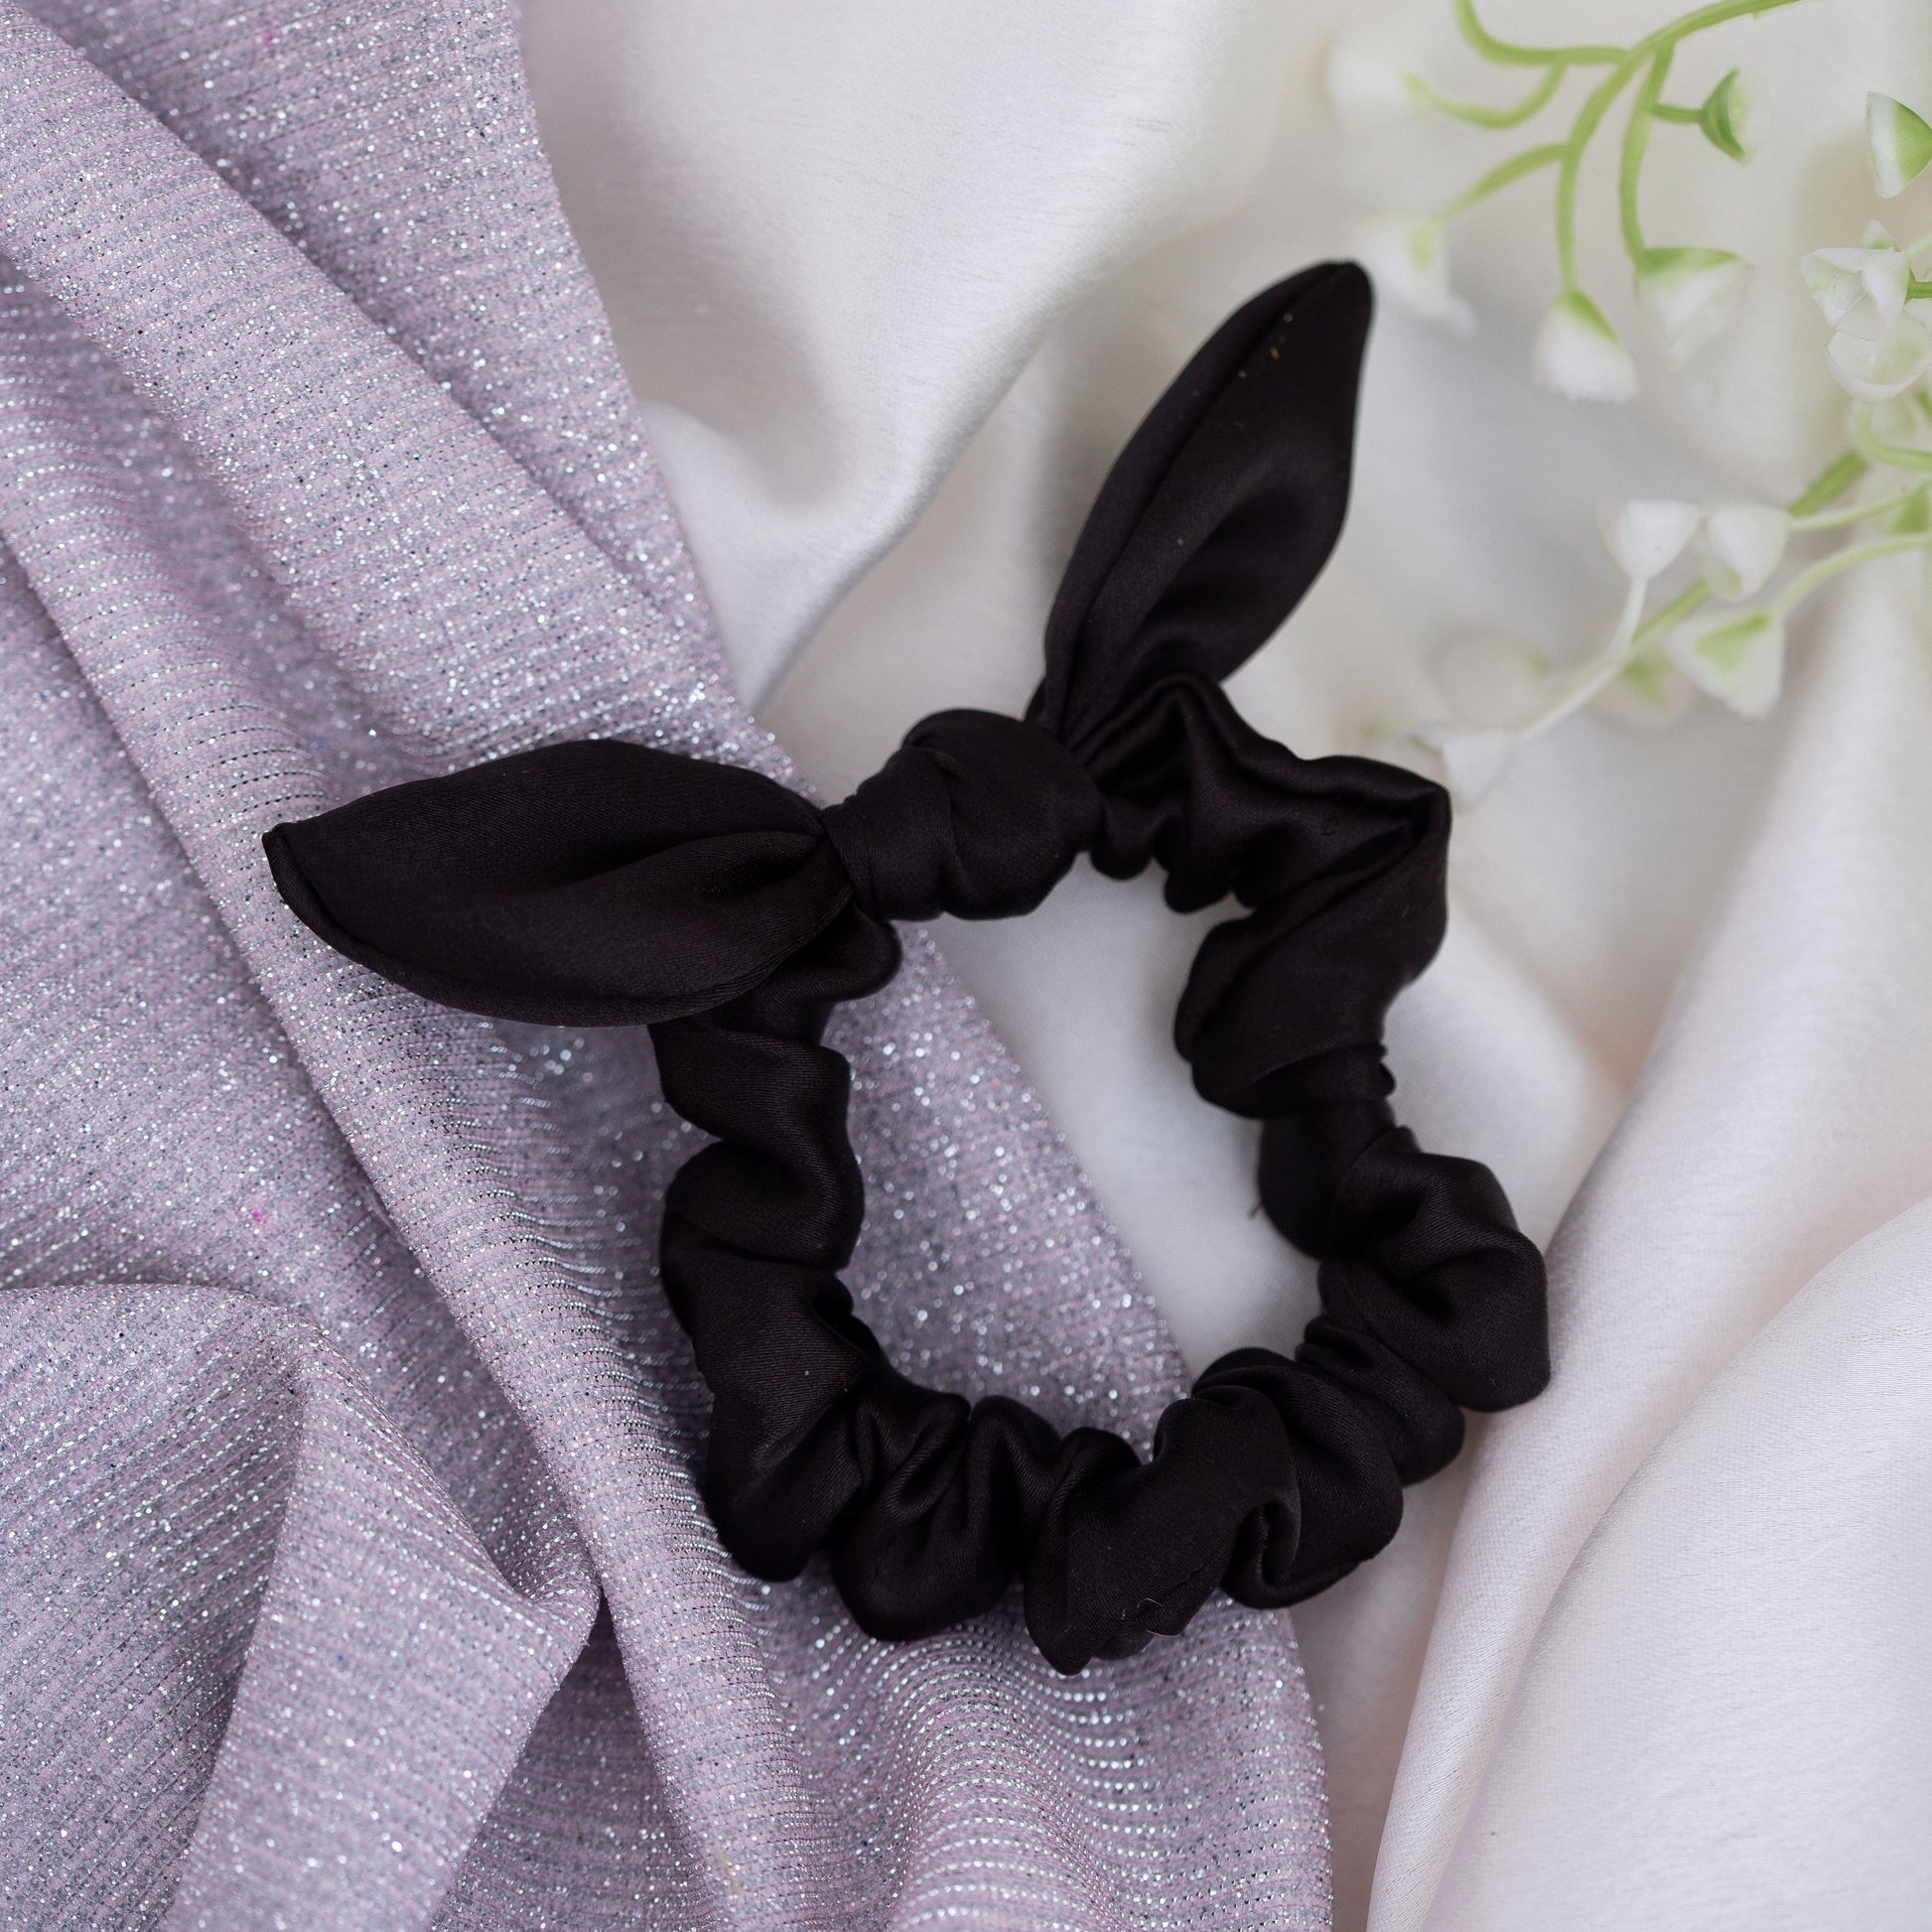 Ribbon Candy - Satin Scrunchie With Tie Knot Detail - Black